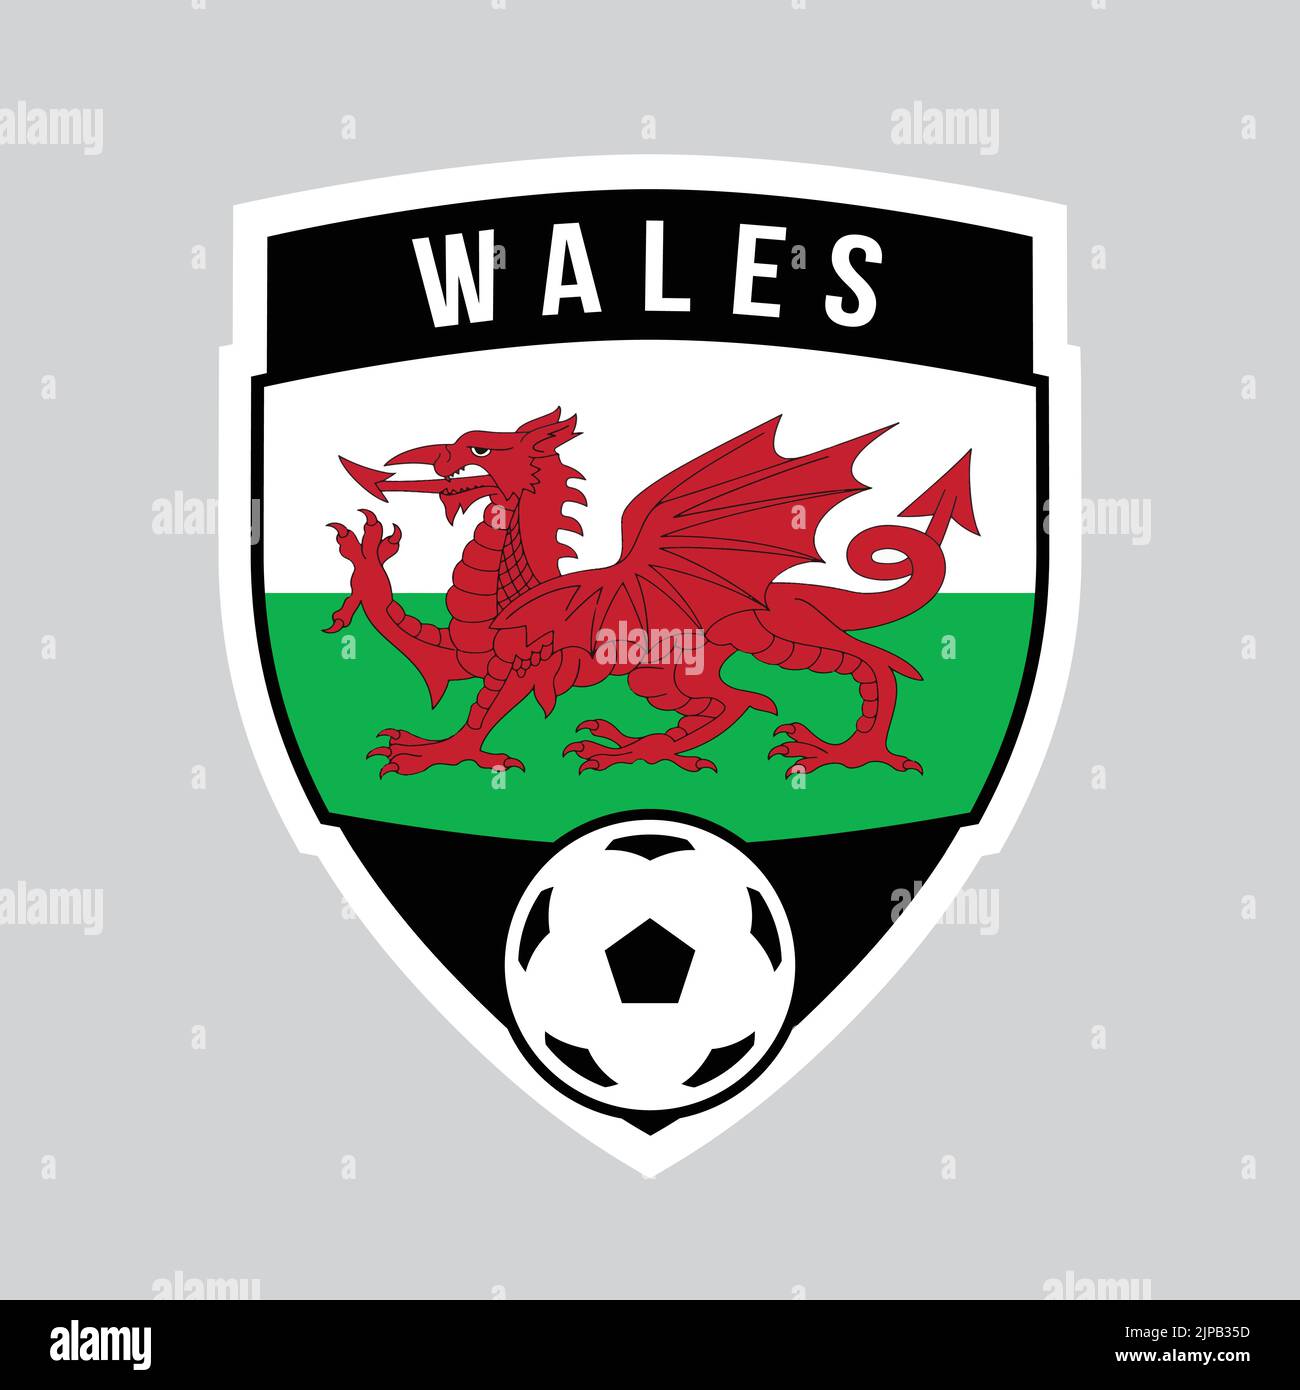 Illustration of Wales Shield Team Badge for Football Tournament Stock Vector